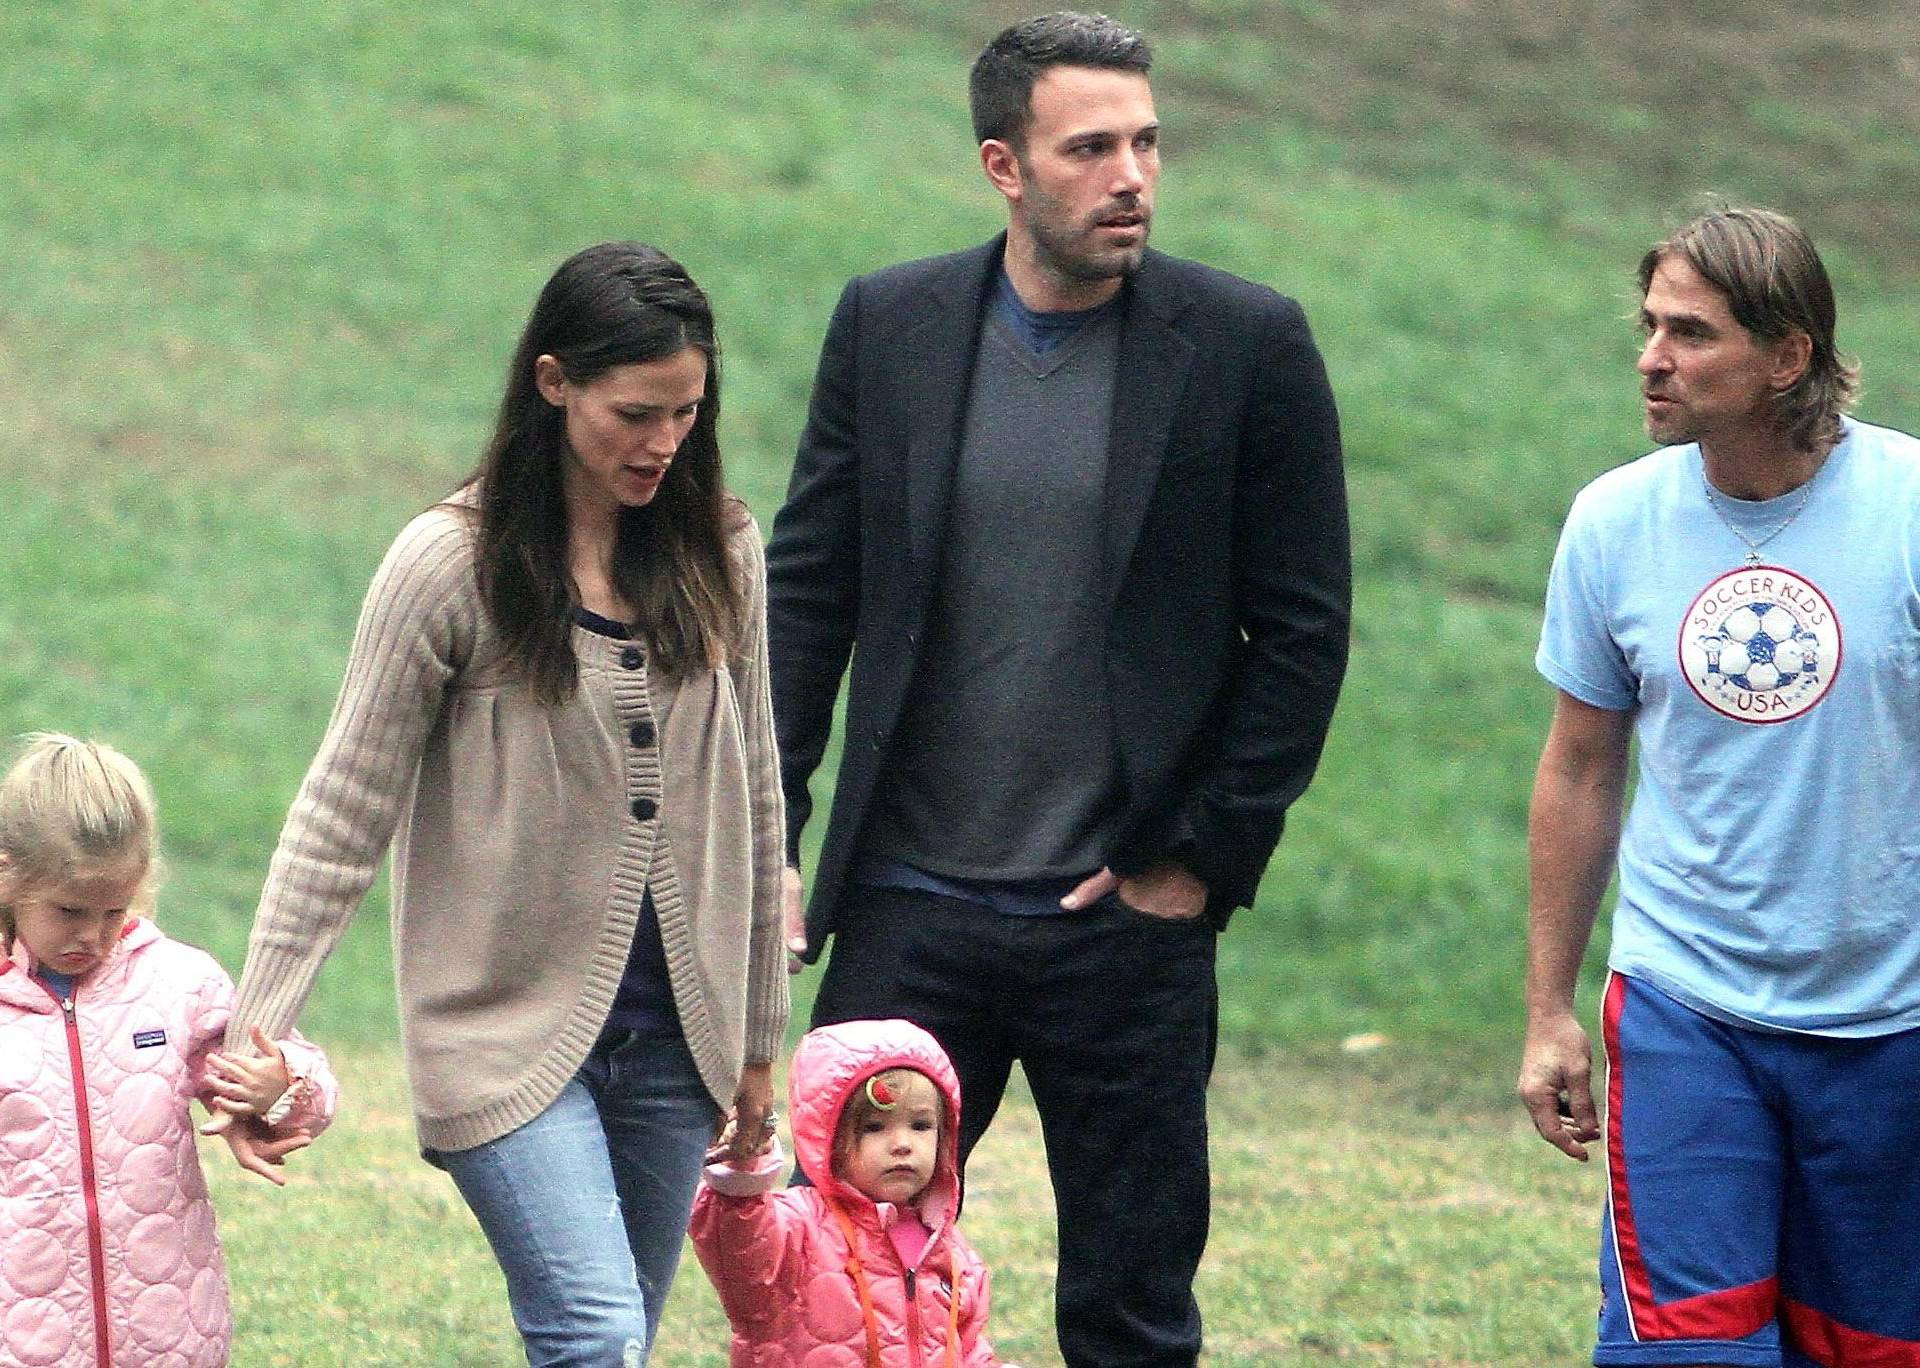 Jennifer Garner and Ben Affleck took there kids to a local park in Los Angeles, USA